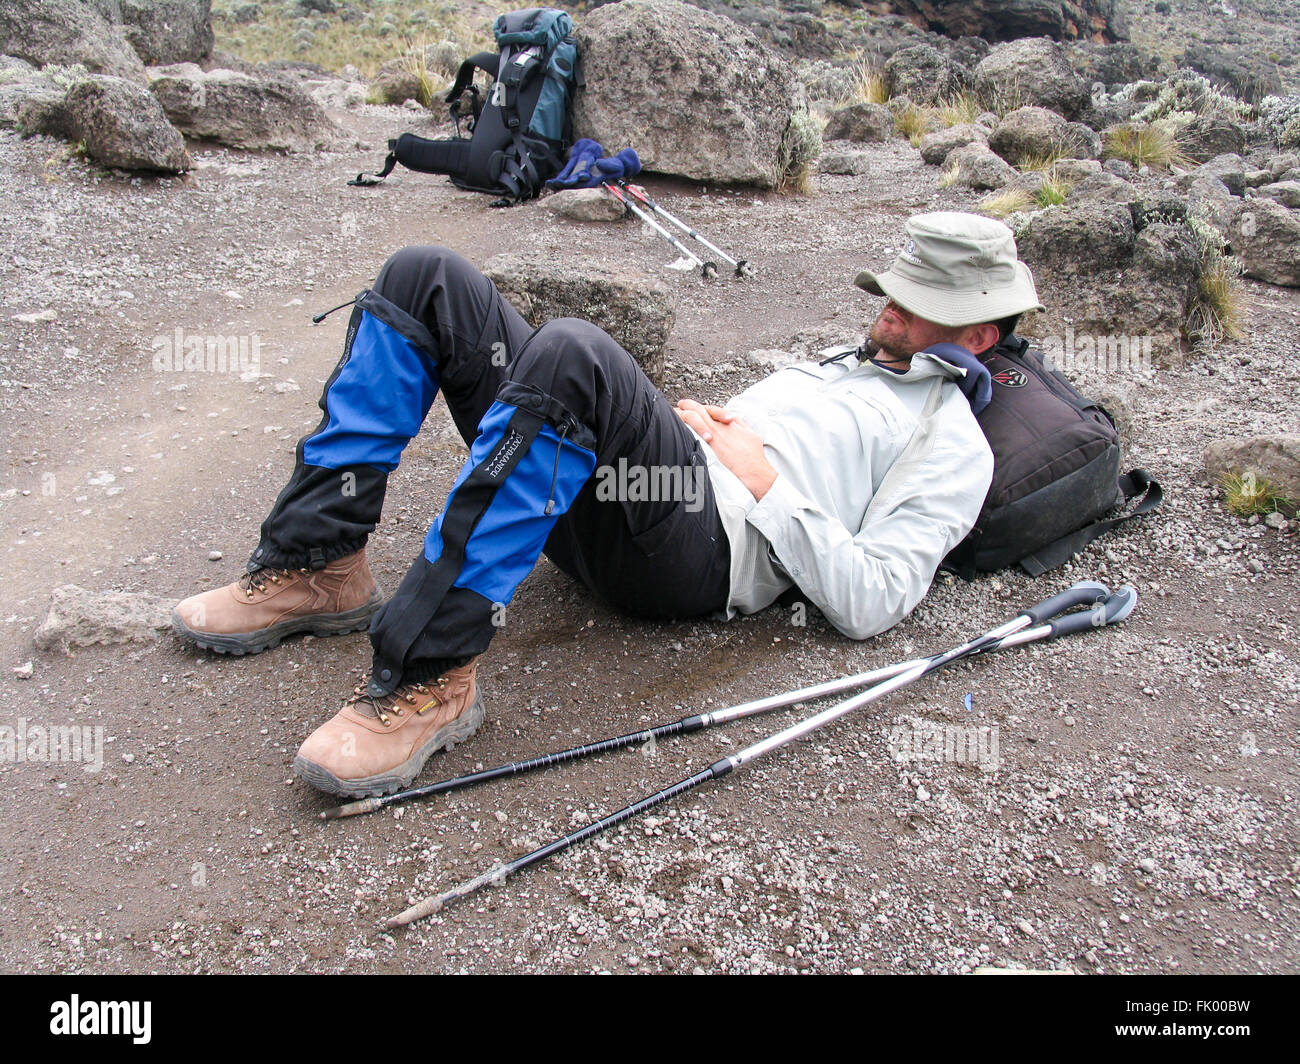 A man resting on the ground during a rest break while climbing Mount Kilimanjaro. Stock Photo